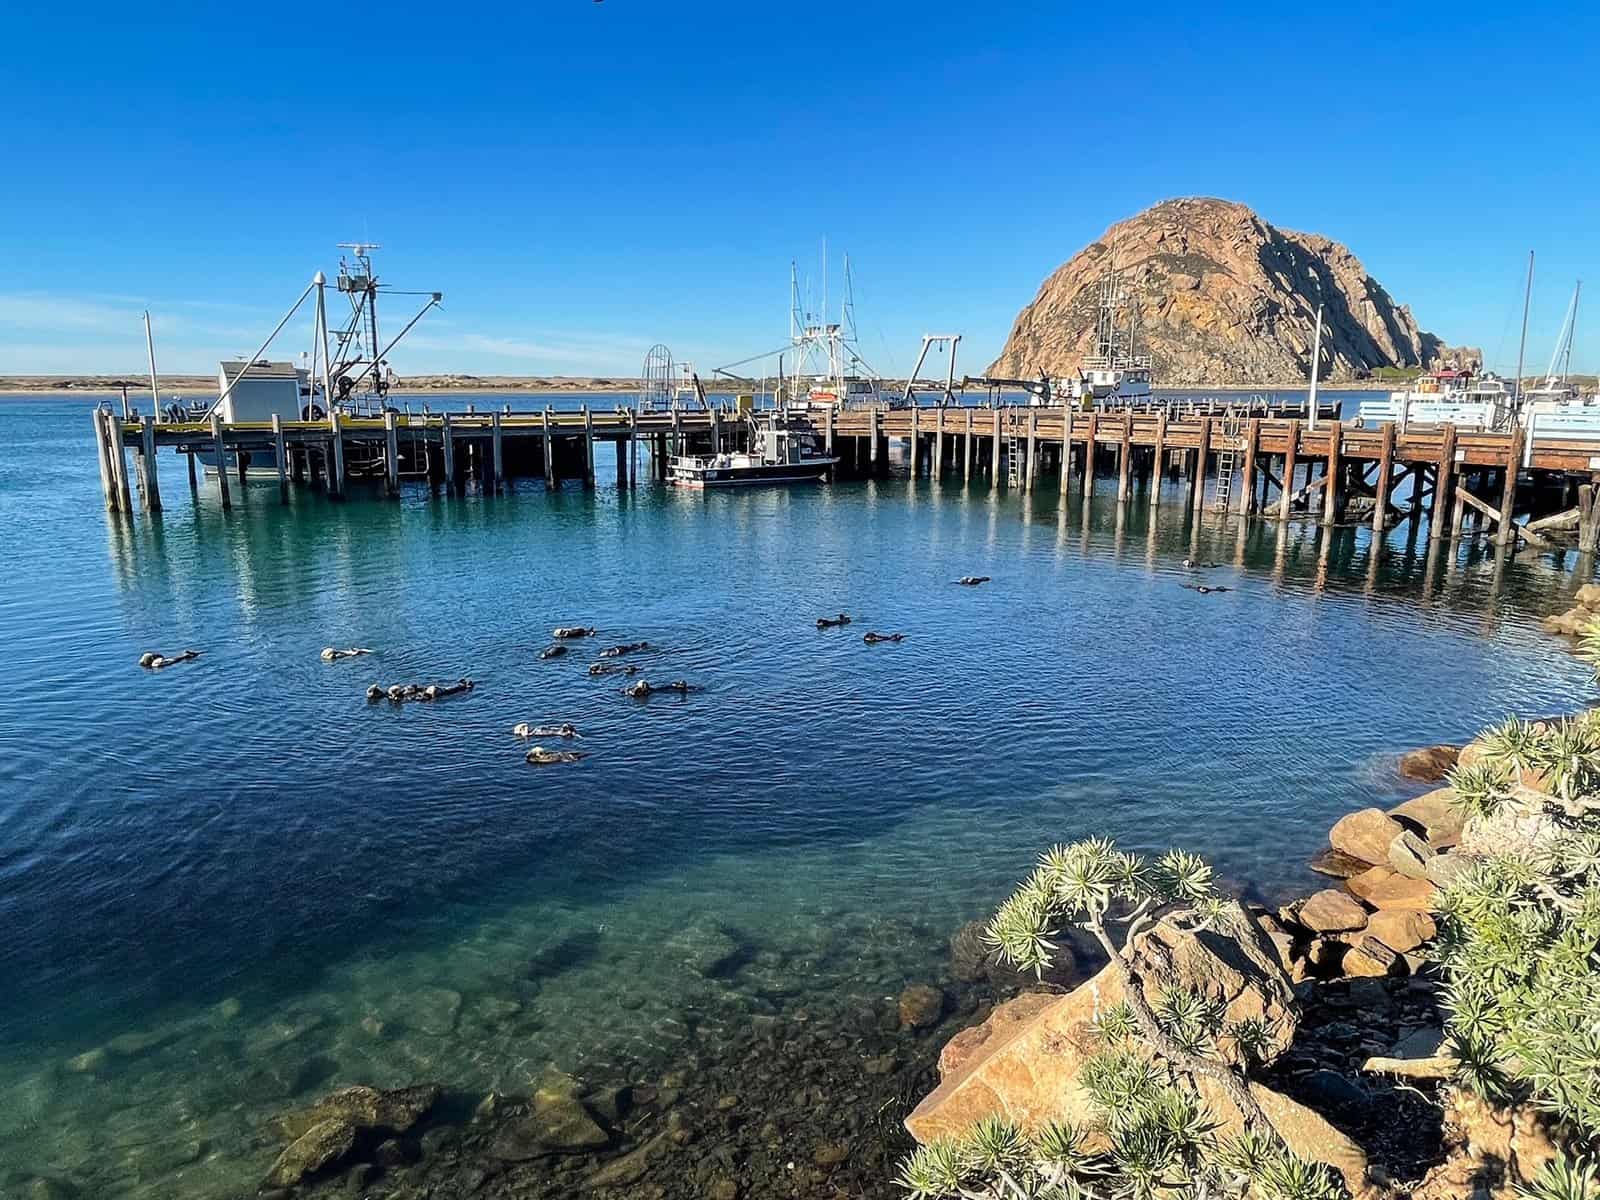 Looking out at Morro Rock across the bay with a pier and otters in the water below.